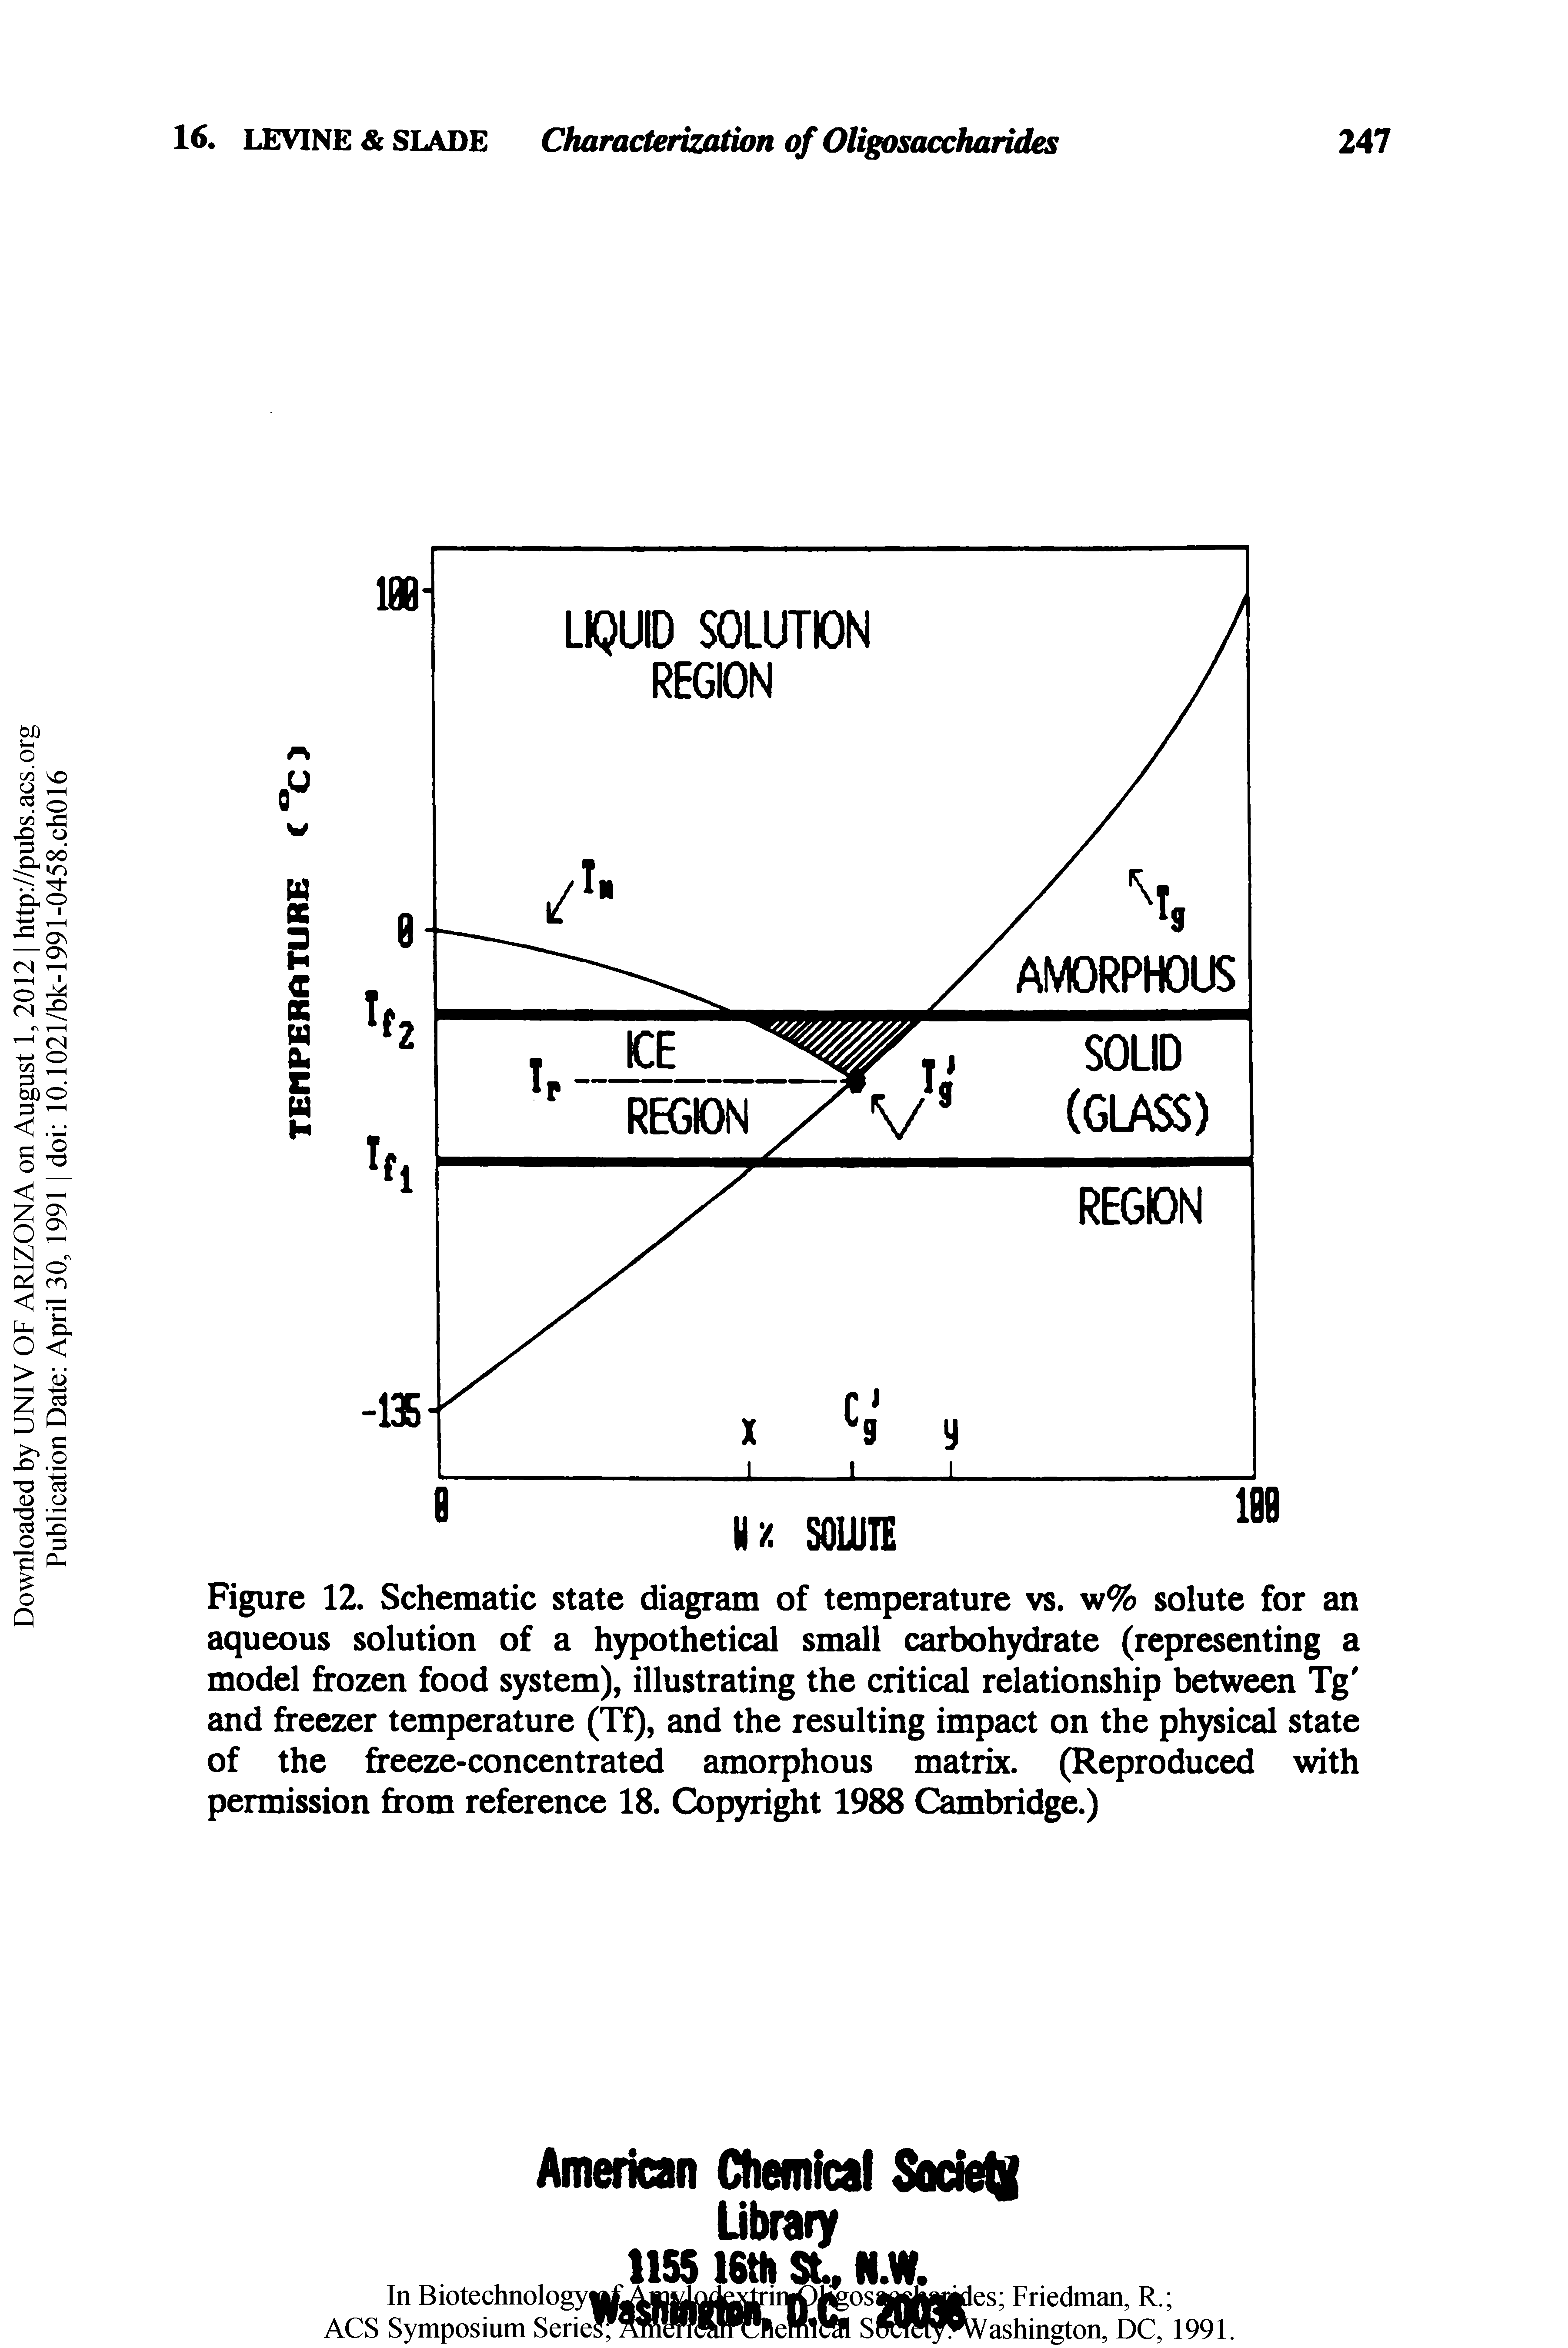 Figure 12. Schematic state diagram of temperature vs. w% solute for an aqueous solution of a hypothetical small carbohydrate (representing a model frozen food system), illustrating the critical relationship between Tg and freezer temperature (Tf), and the resulting impact on the physical state of the freeze-concentrated amorphous matrix. (Reproduced with permission from reference 18. Copyri t 1988 Cambridge.)...